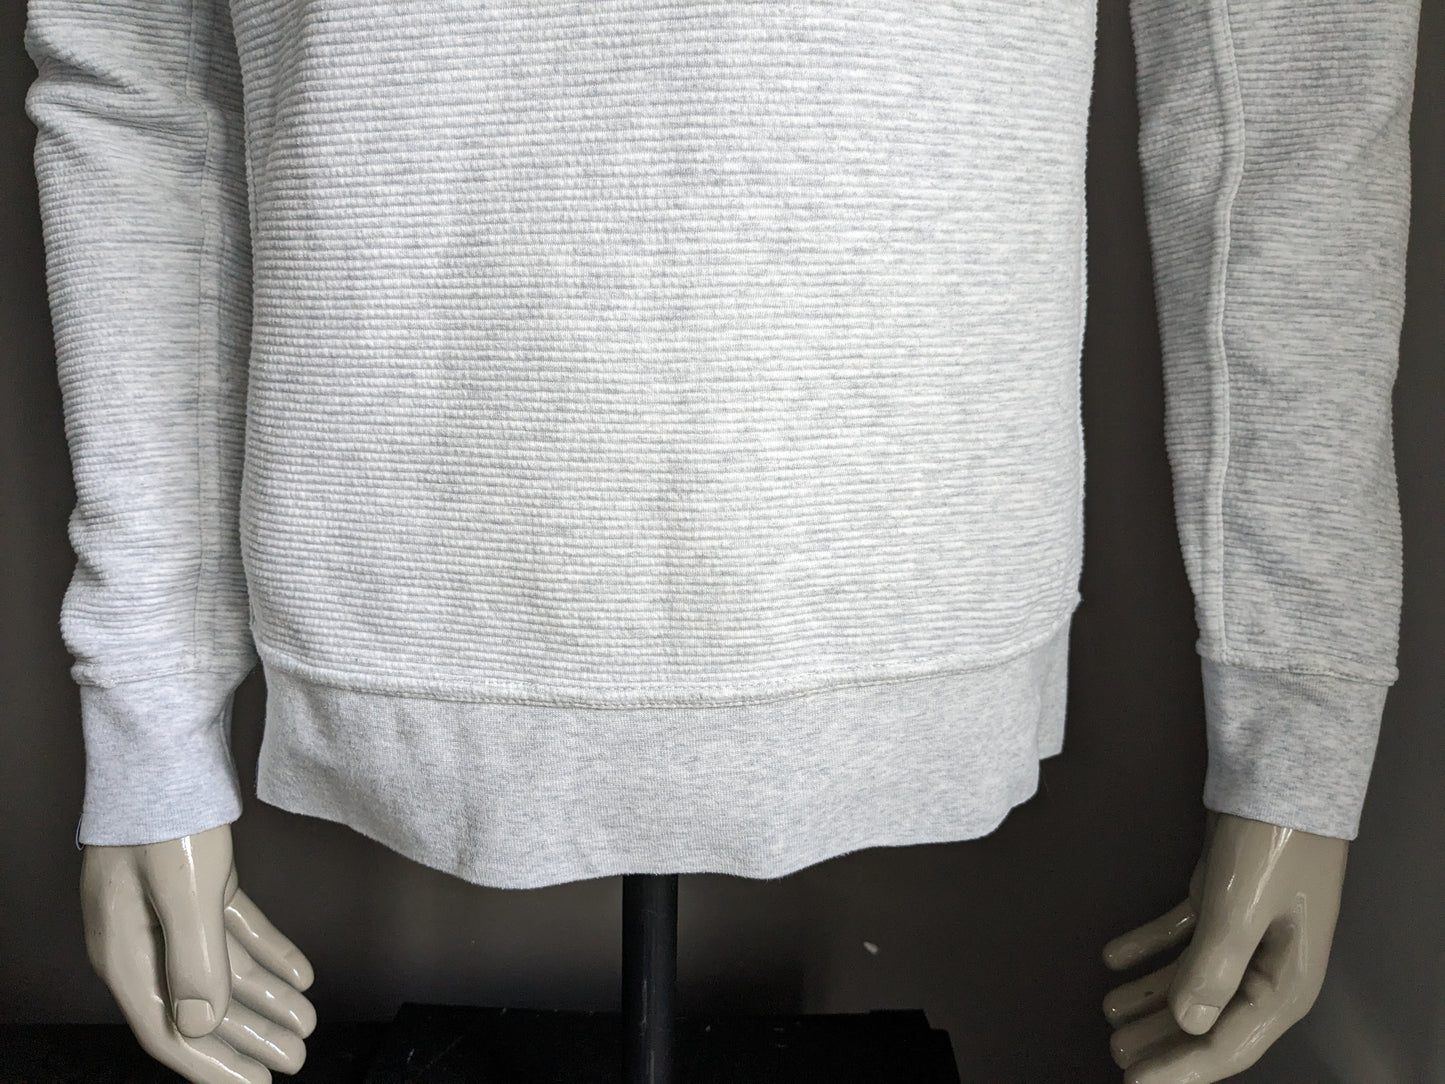 Chasin sweater. White gray tangible mixed motif. Size L.